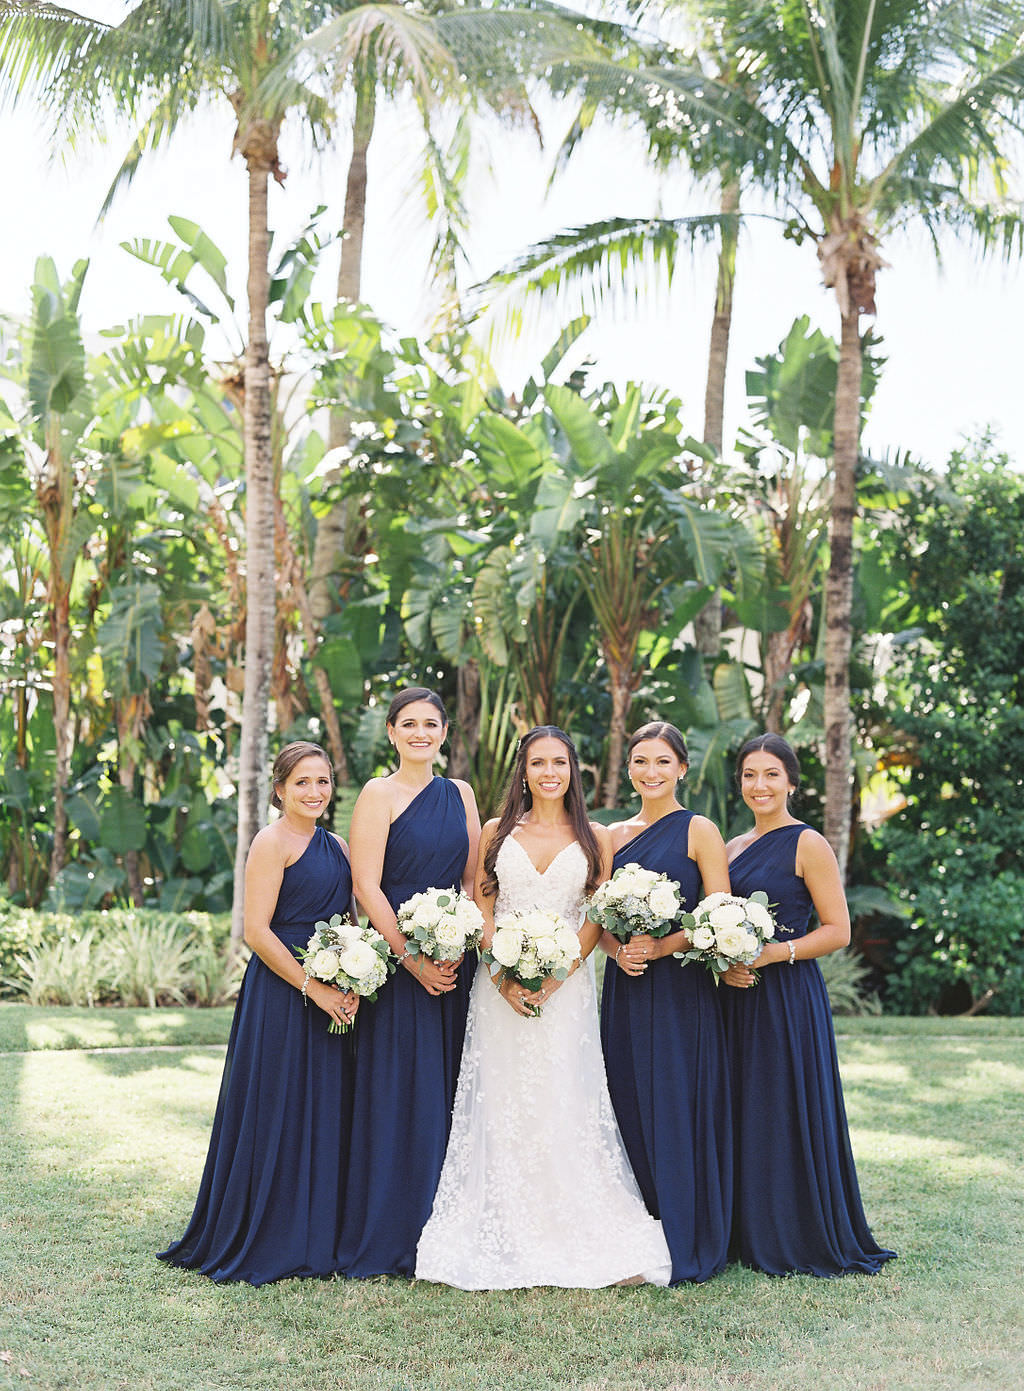 Classic Florida Bride and Bridesmaids in Long One Shoulder Navy Blue Dresses, Dark Midnight Blue Brideside Bridesmaid Dresses, Bride Wearing White Lazaro Wedding Dress, Holding Ivory Floral Bouquets with Greenery | Sarasota Luxury Wedding Planner NK Productions Wedding Planning